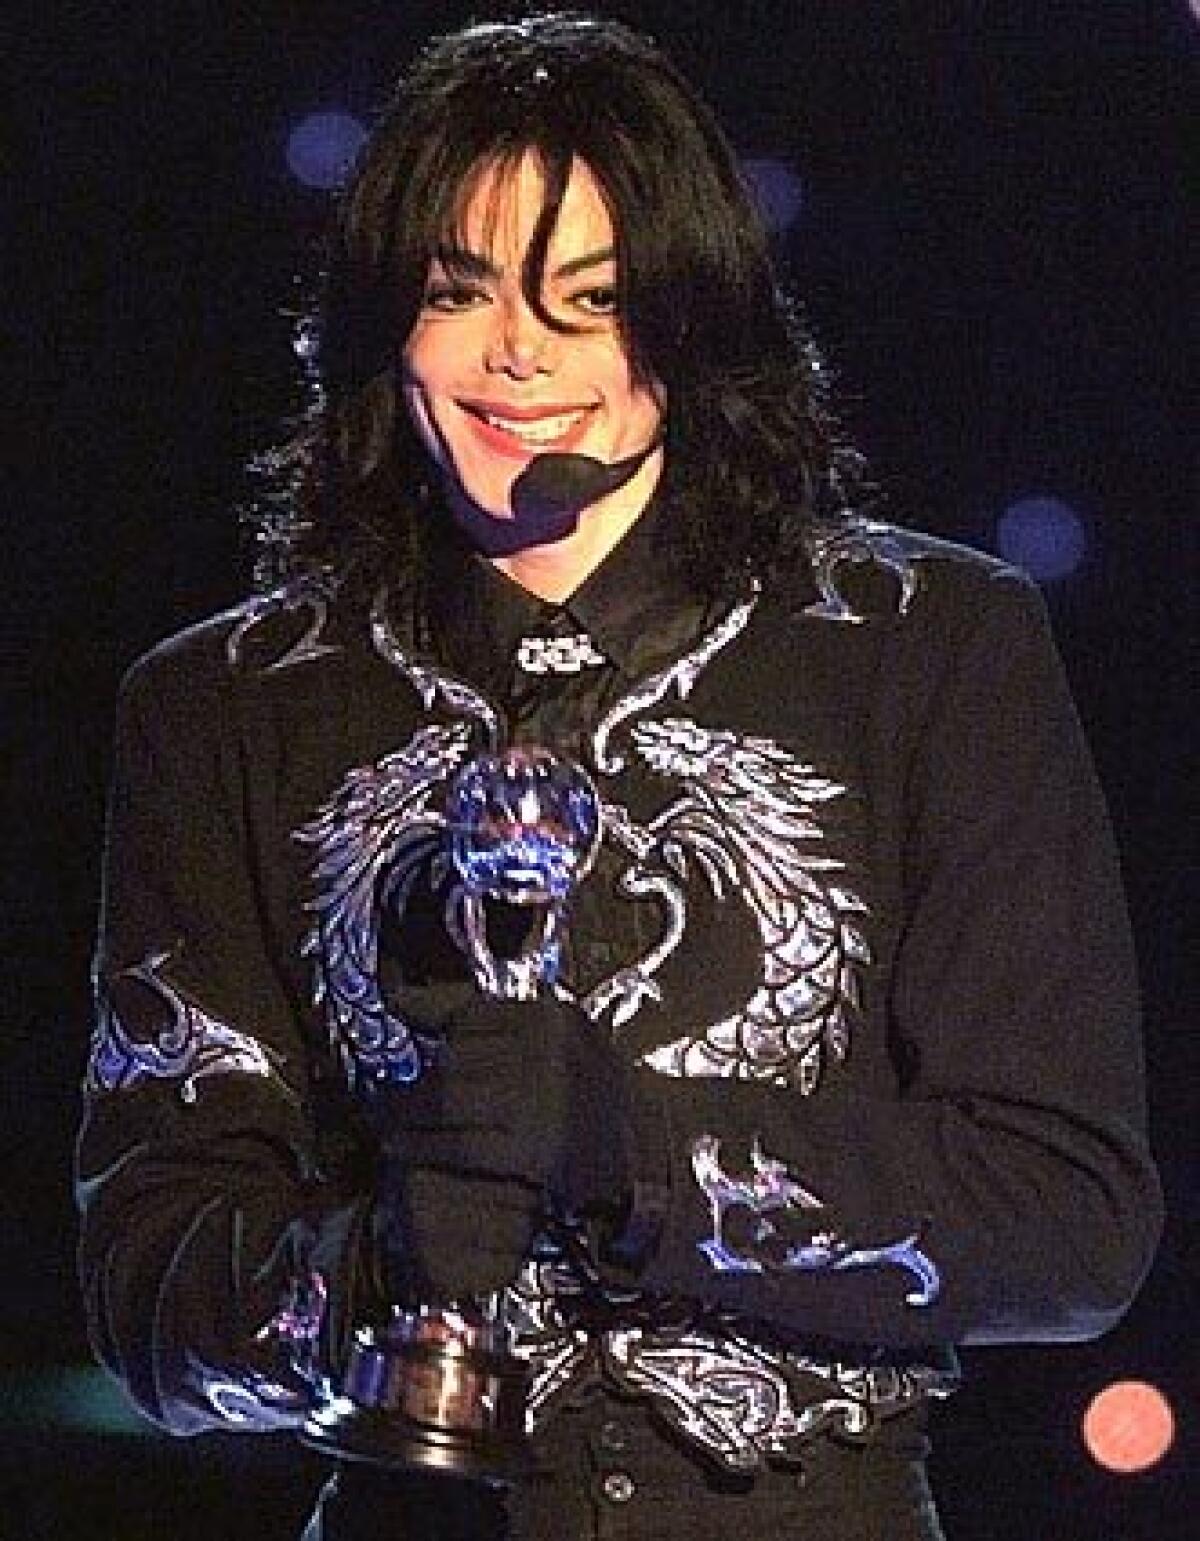 Michael Jackson: Michael Jackson's life was infused with fantasy